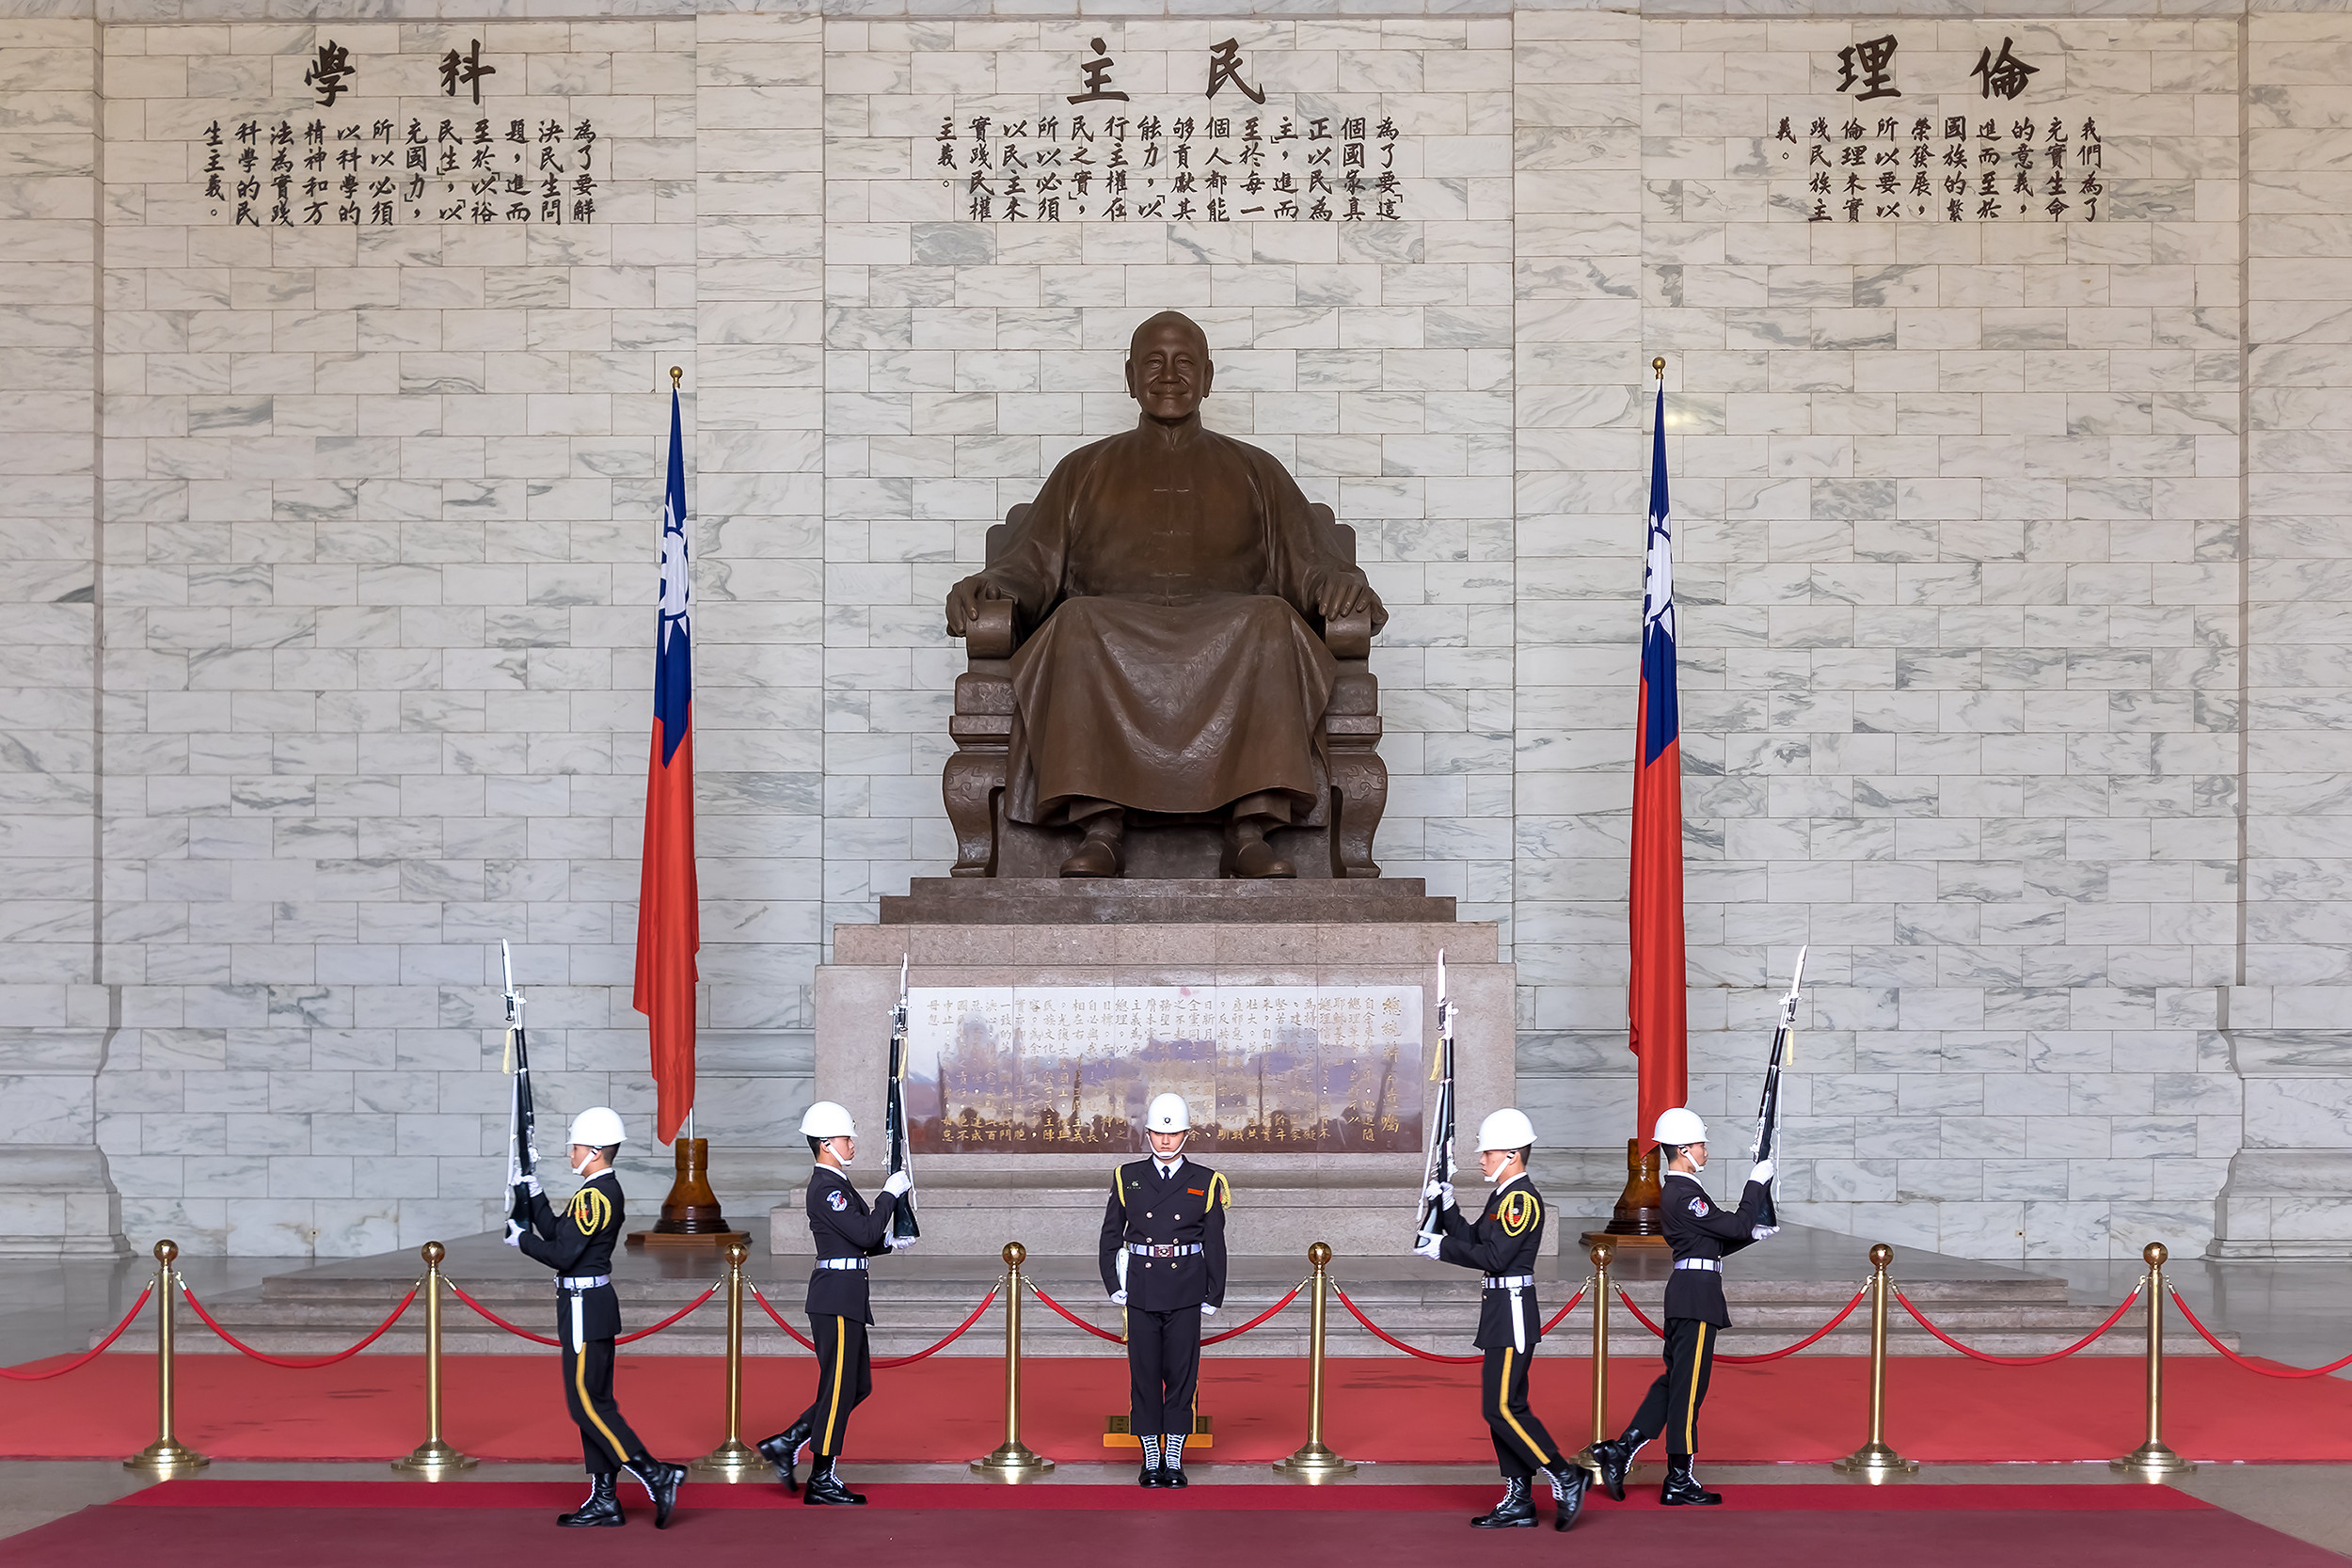 There are hundreds of statues of late president Chiang Kai-shek in public spaces across Taiwan. Photo: Shutterstock